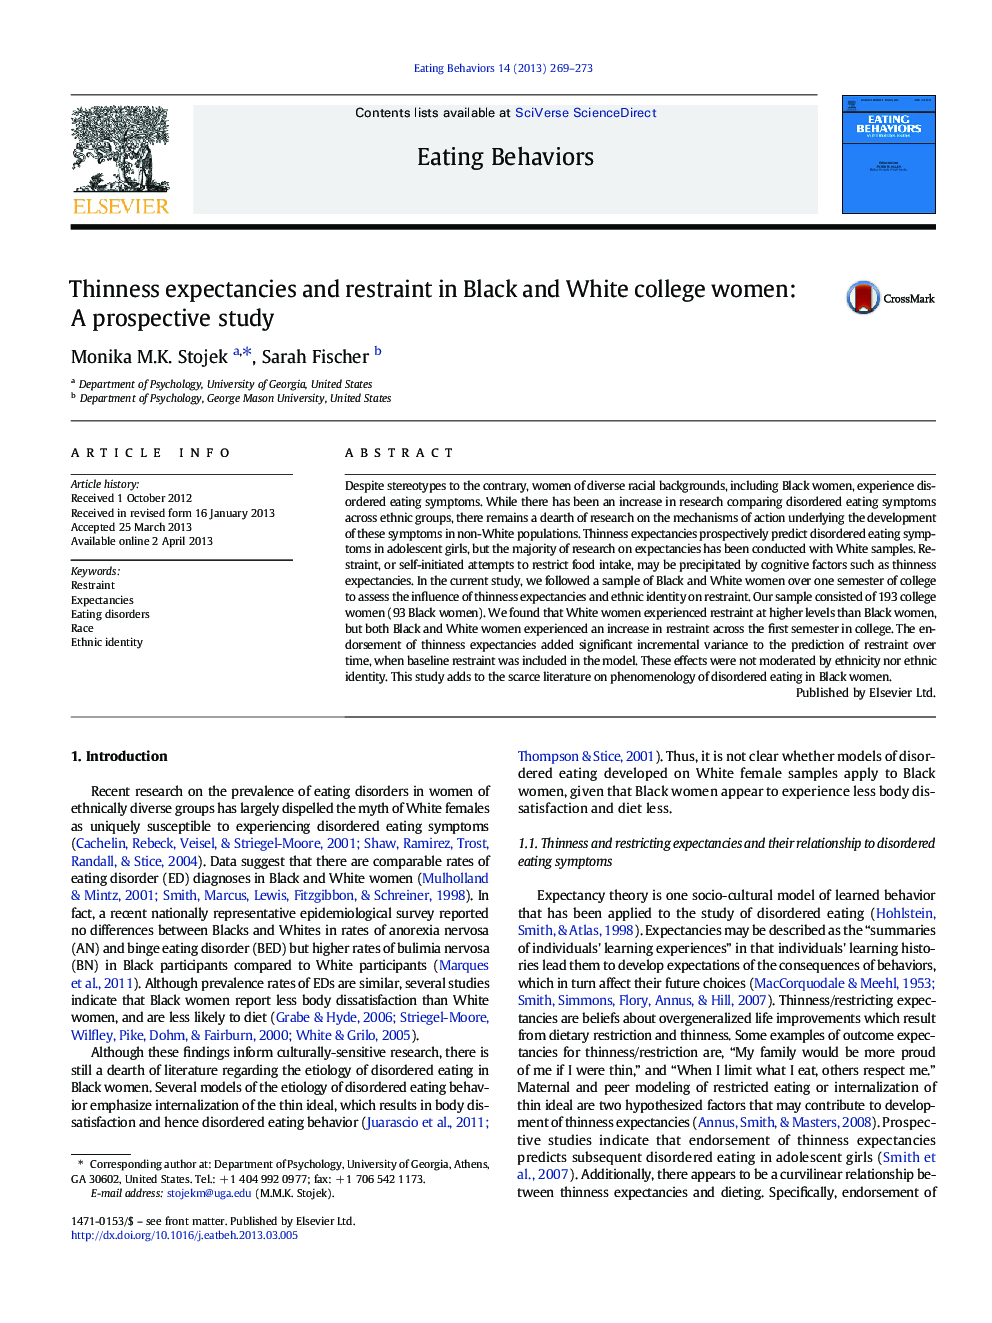 Thinness expectancies and restraint in Black and White college women: A prospective study